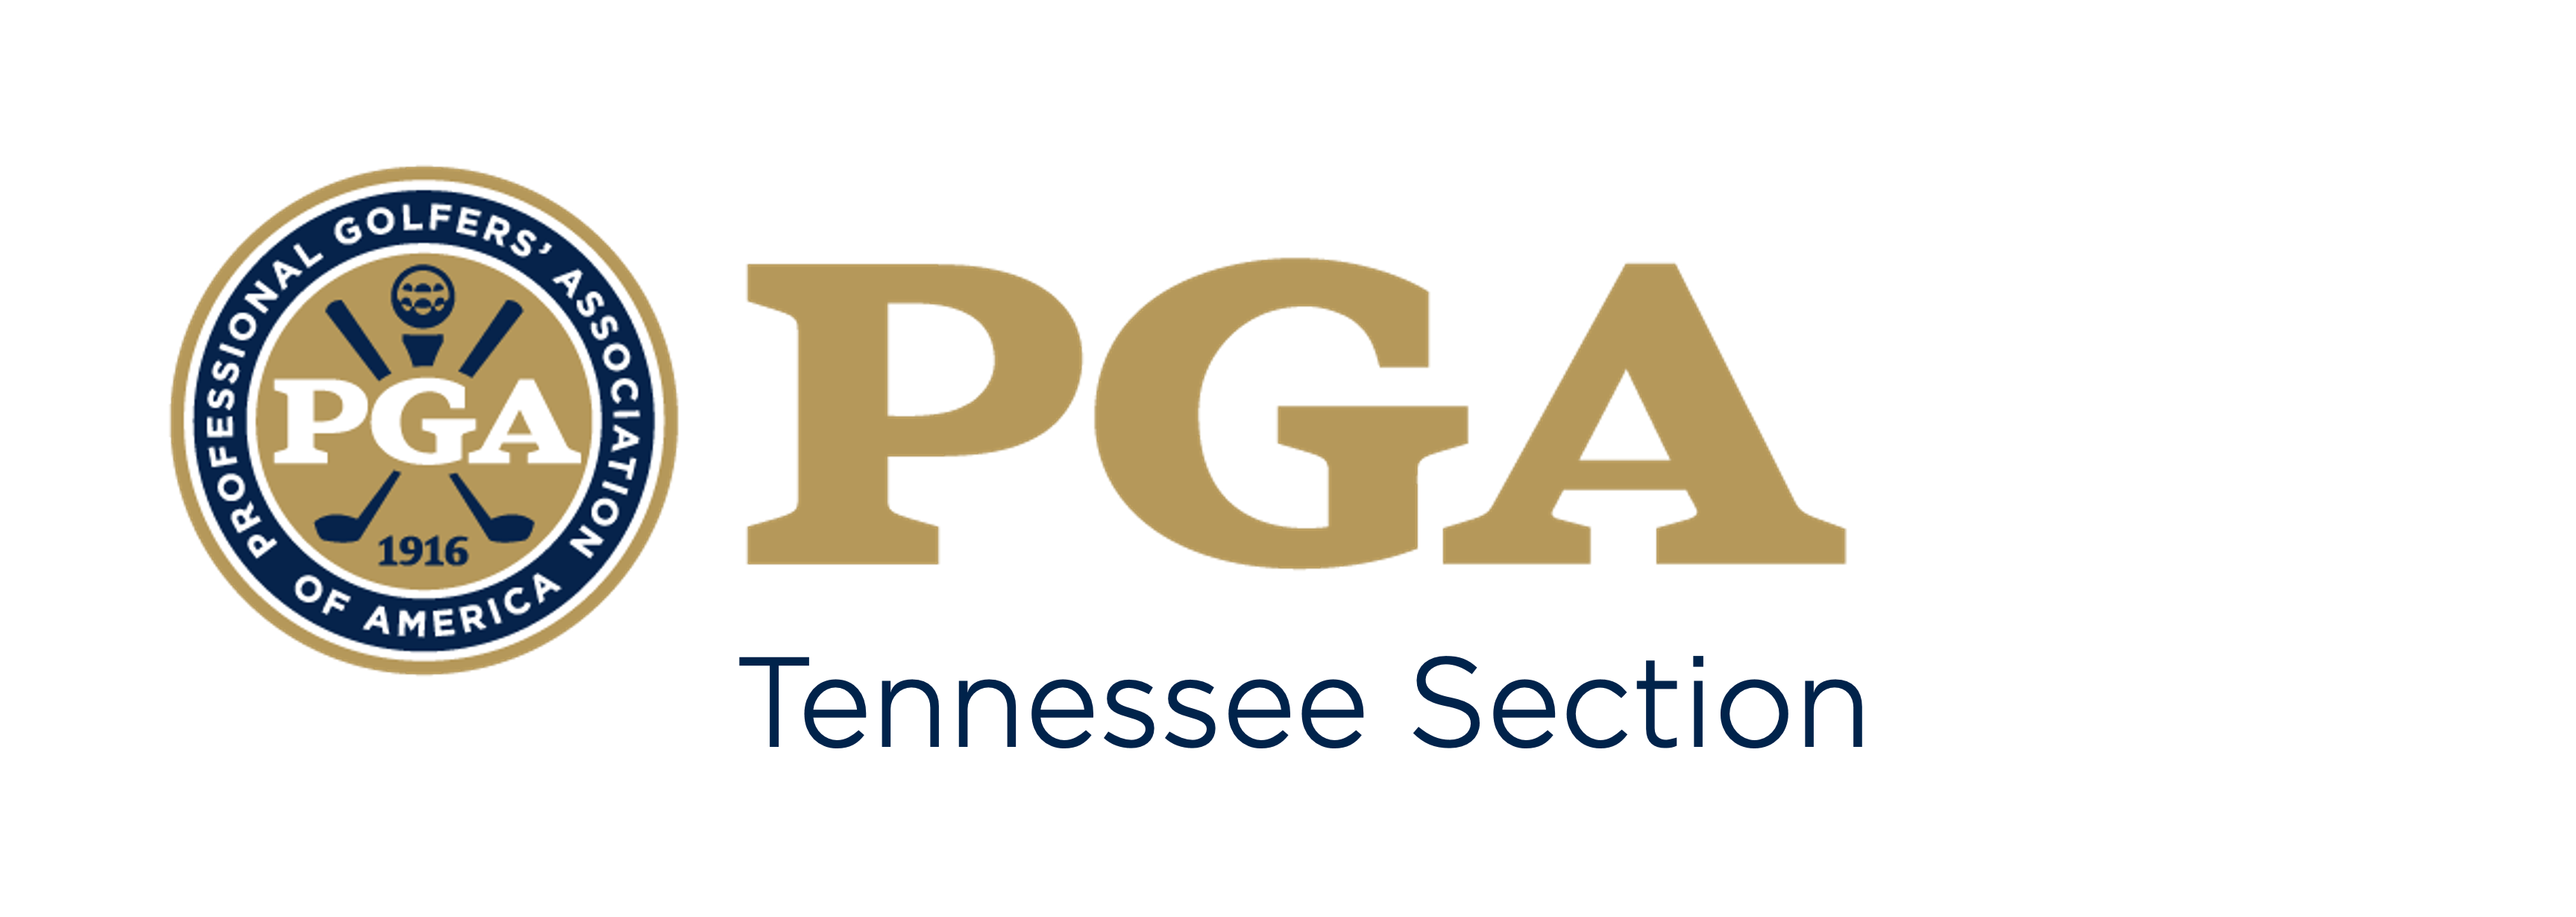 Tennessee PGA Hole In One Program